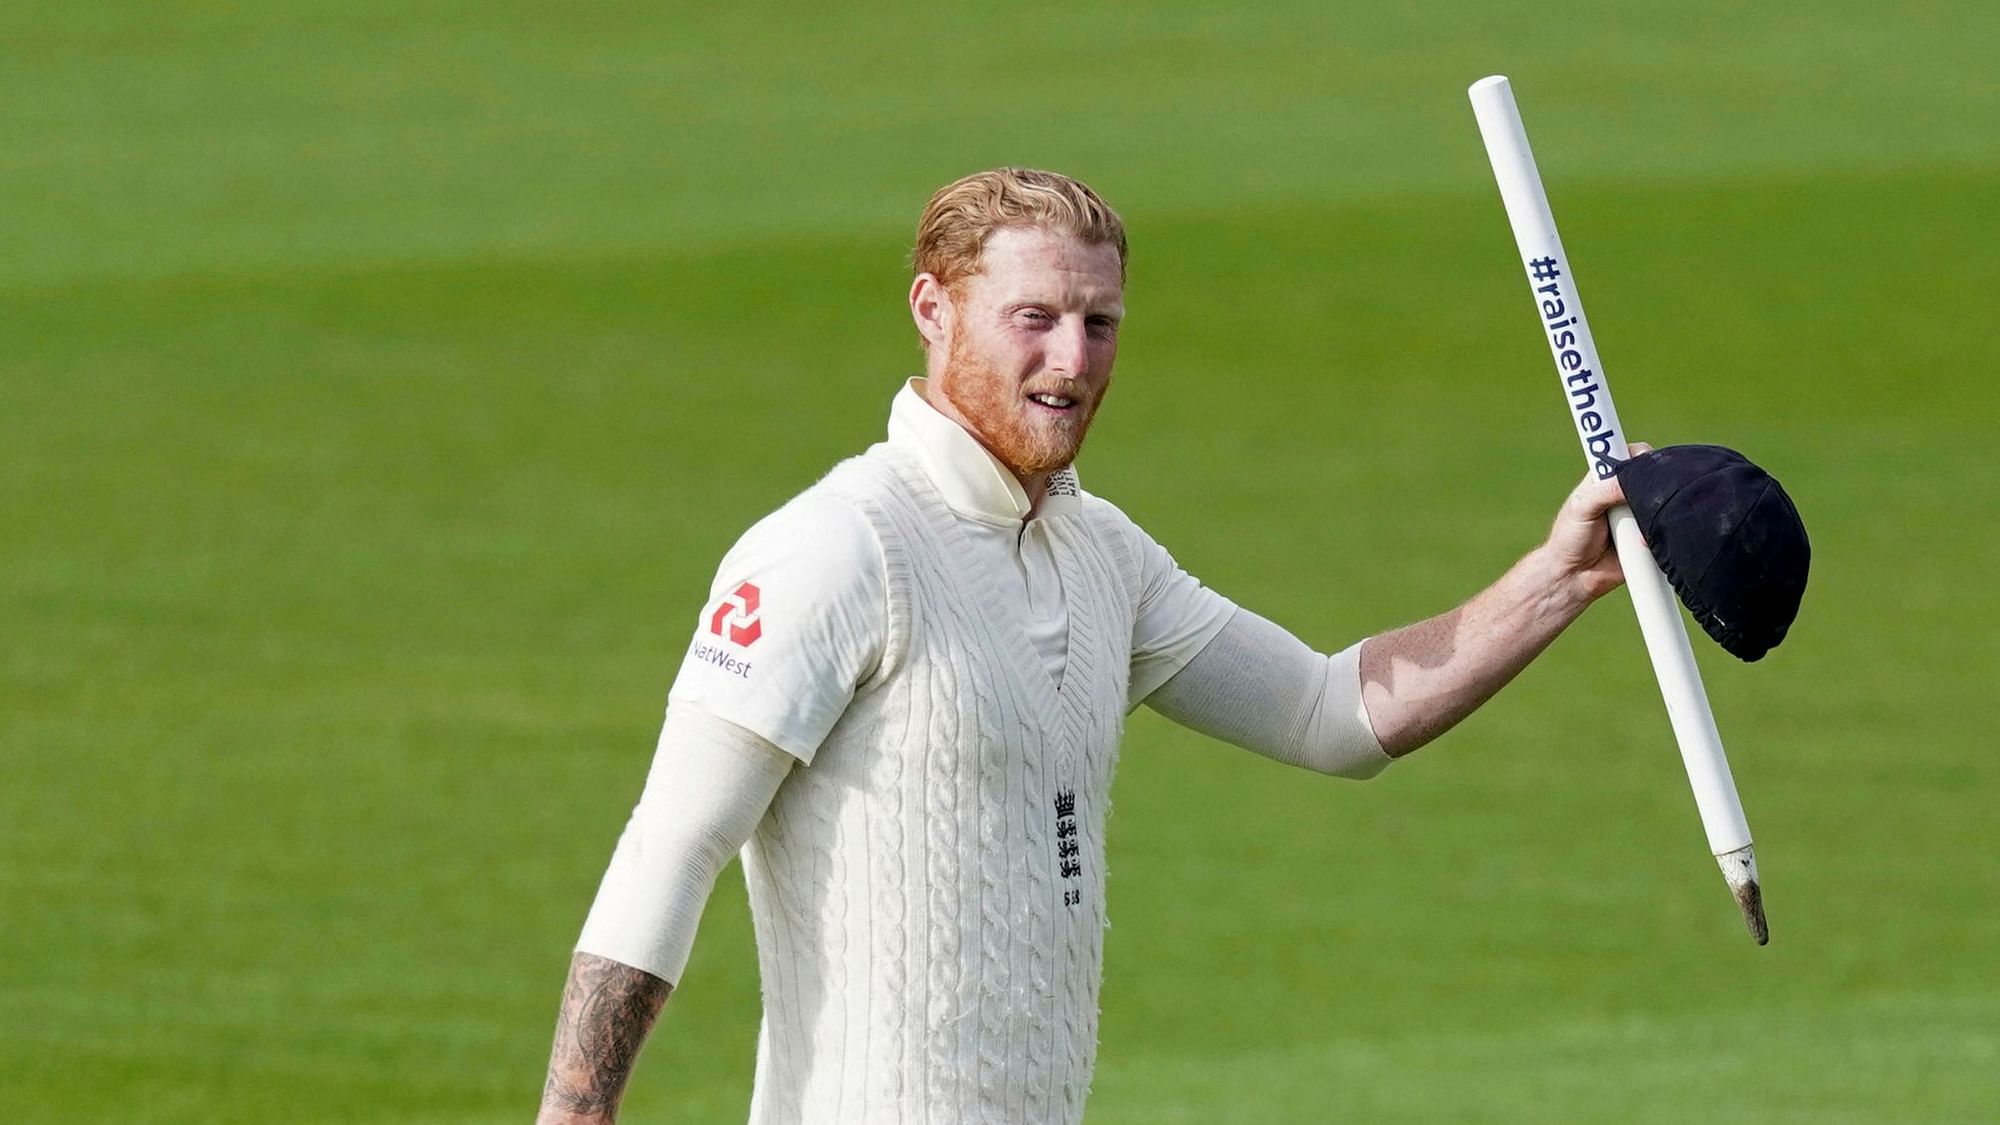 Ben Stokes explains the brown patch on the backside of his pants.